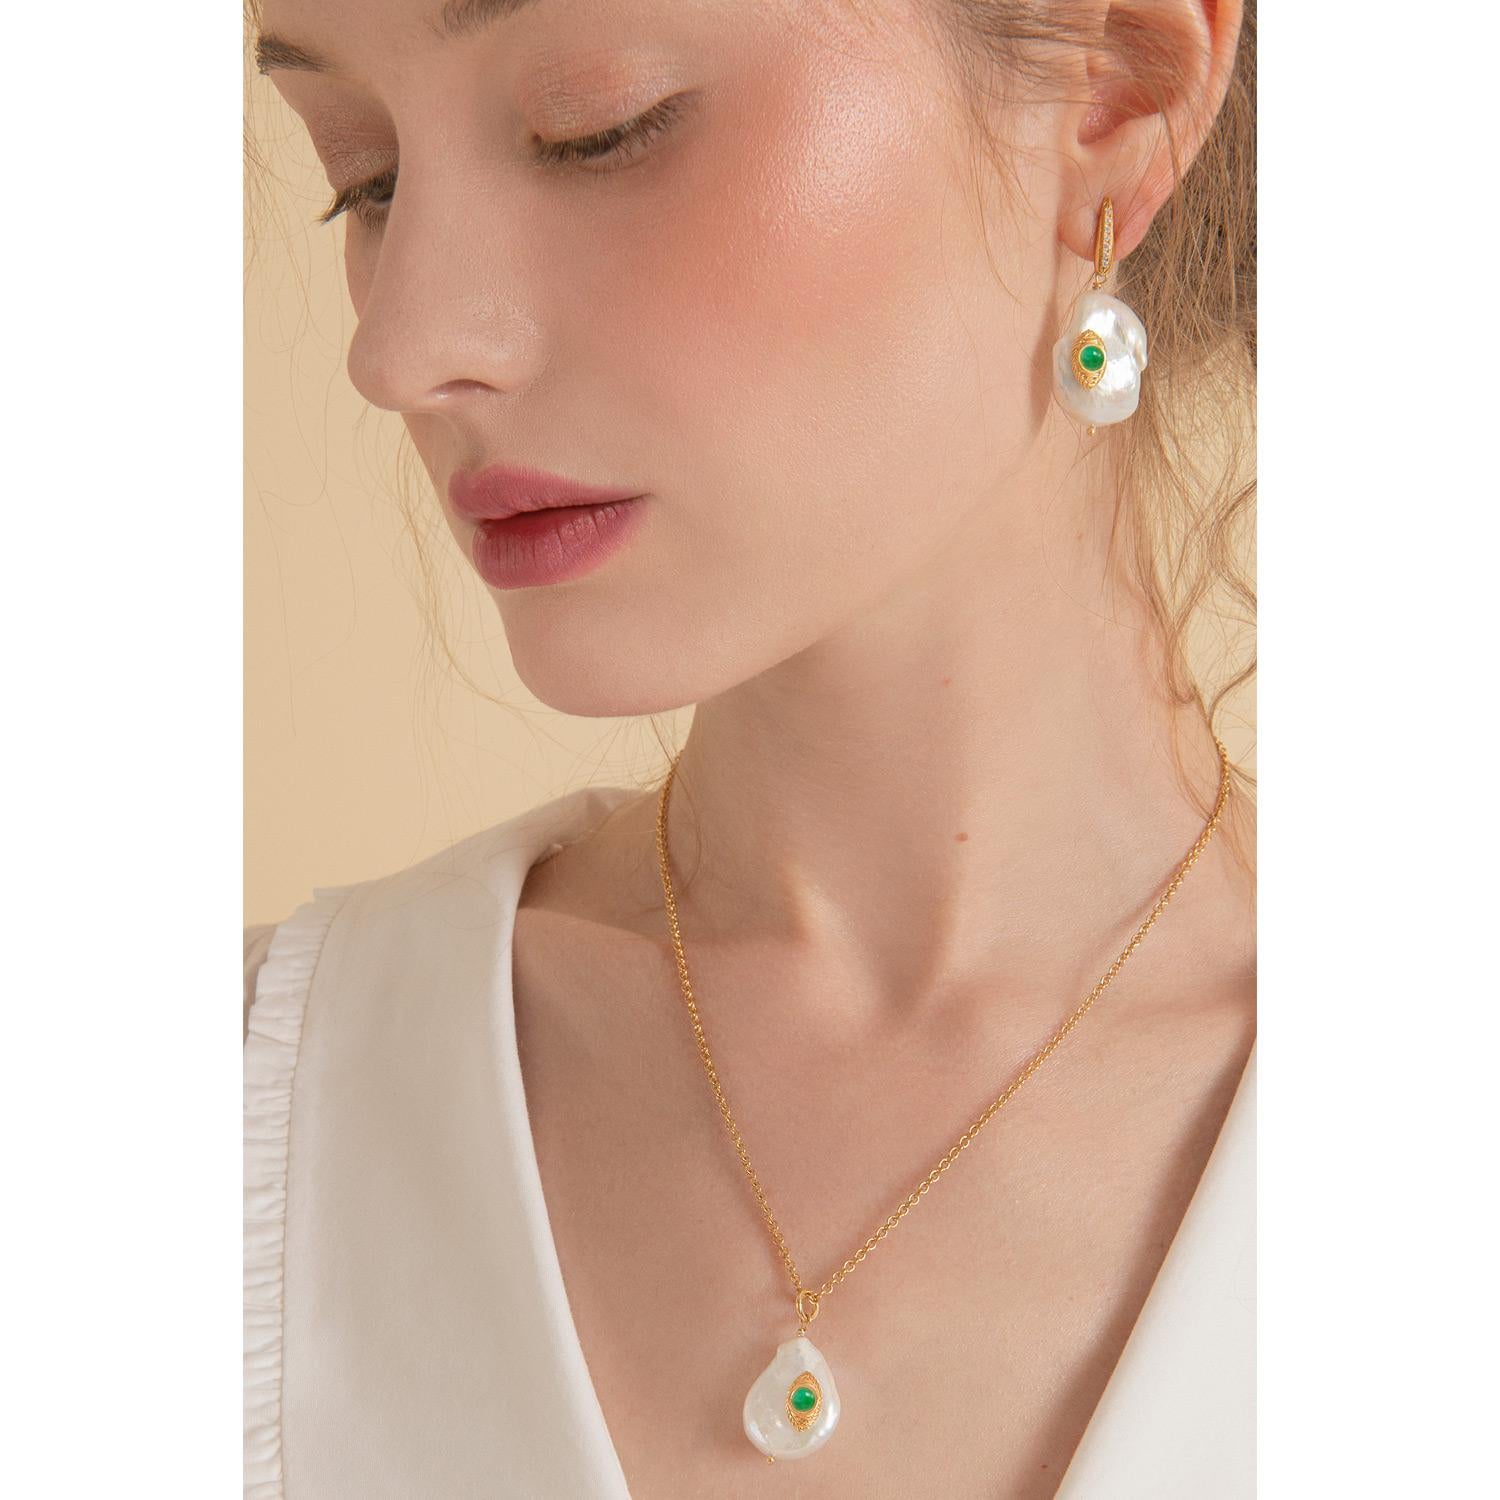 'The Eye' pendants by Vintouch are handcrafted in Italy from 18-karat gold-plated silver featuring vivid green emeralds. The dainty pearl is handset with a 18-karat gold-plated silver eye-looking element inspired by Egyptian Eye of Horus,